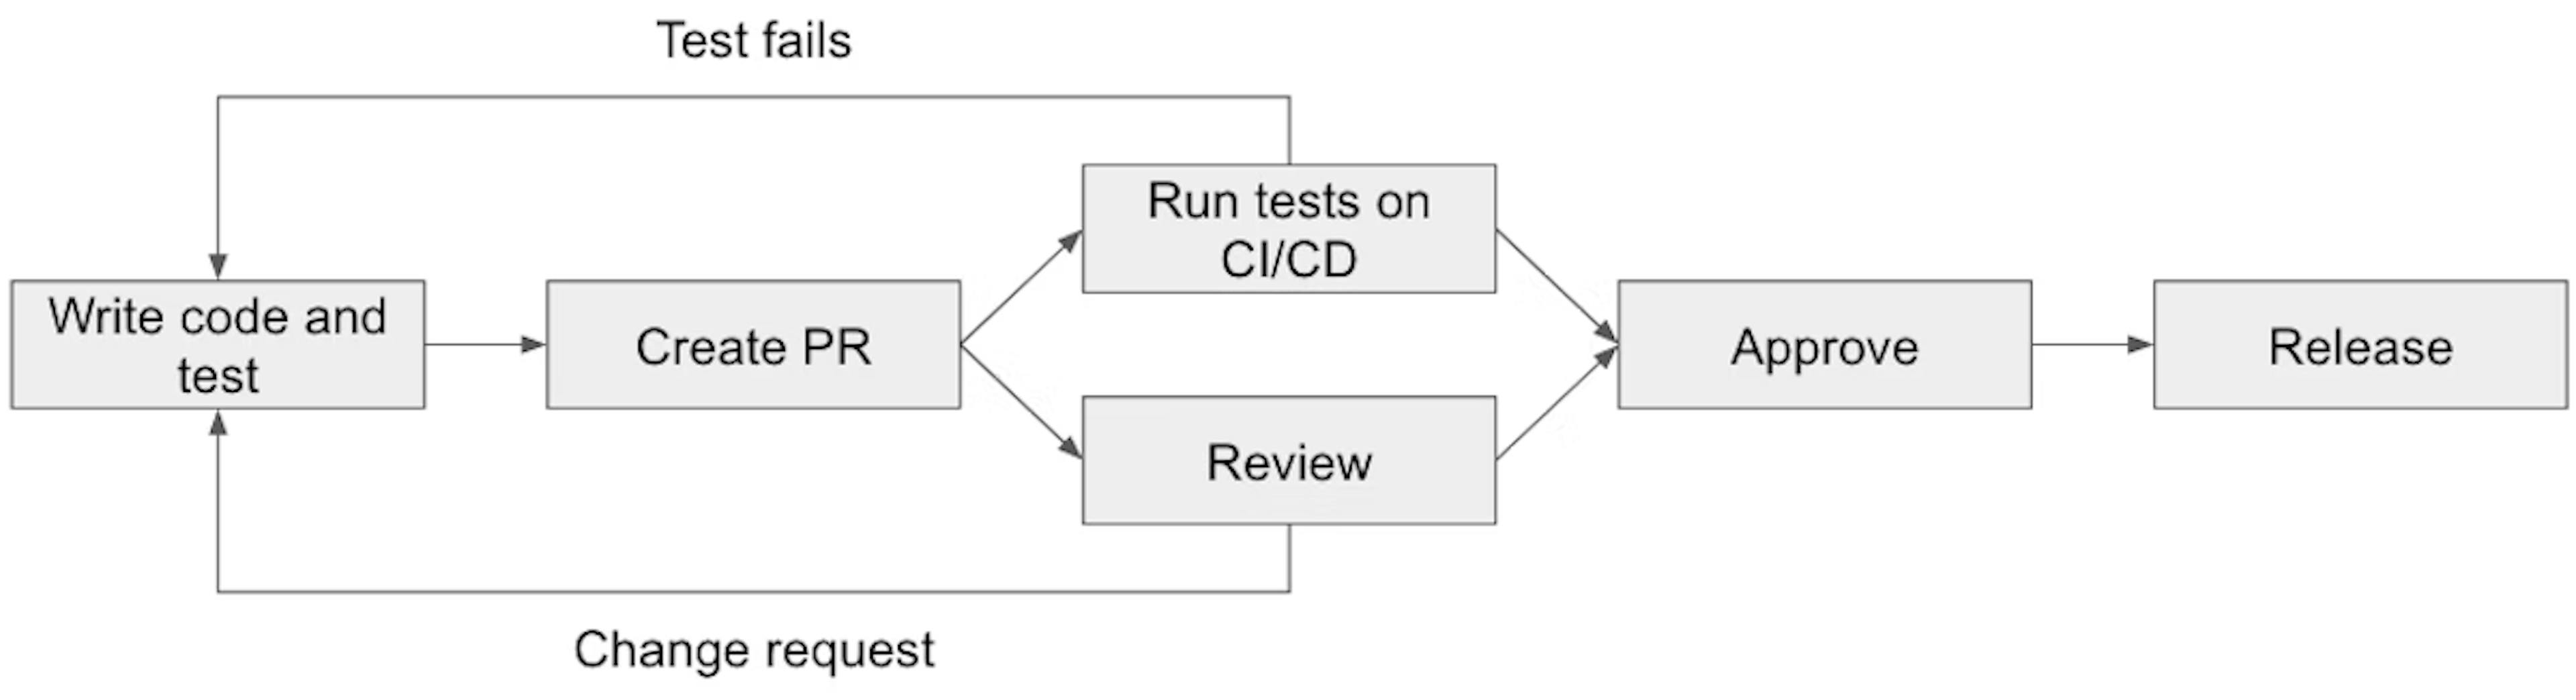 Test release cycle diagram.